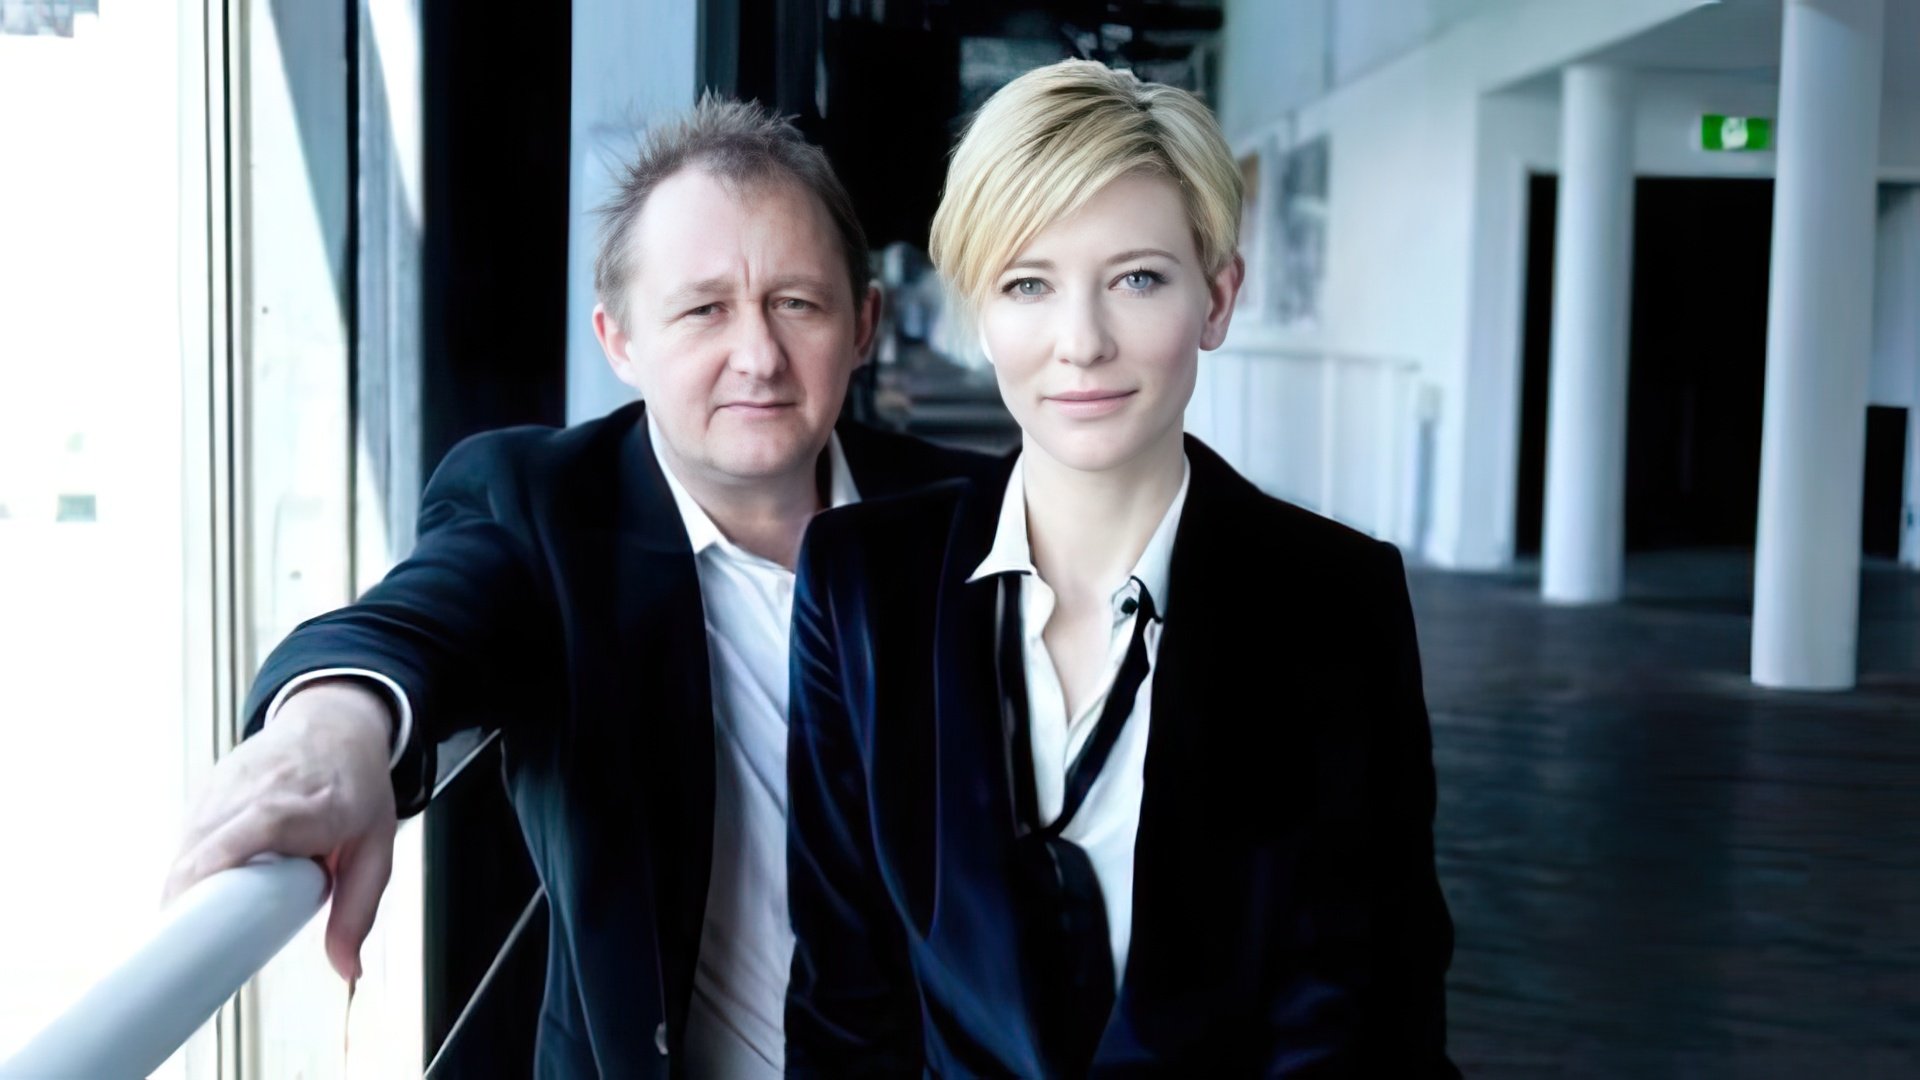 Cate Blanchett with her husband Andrew Upton